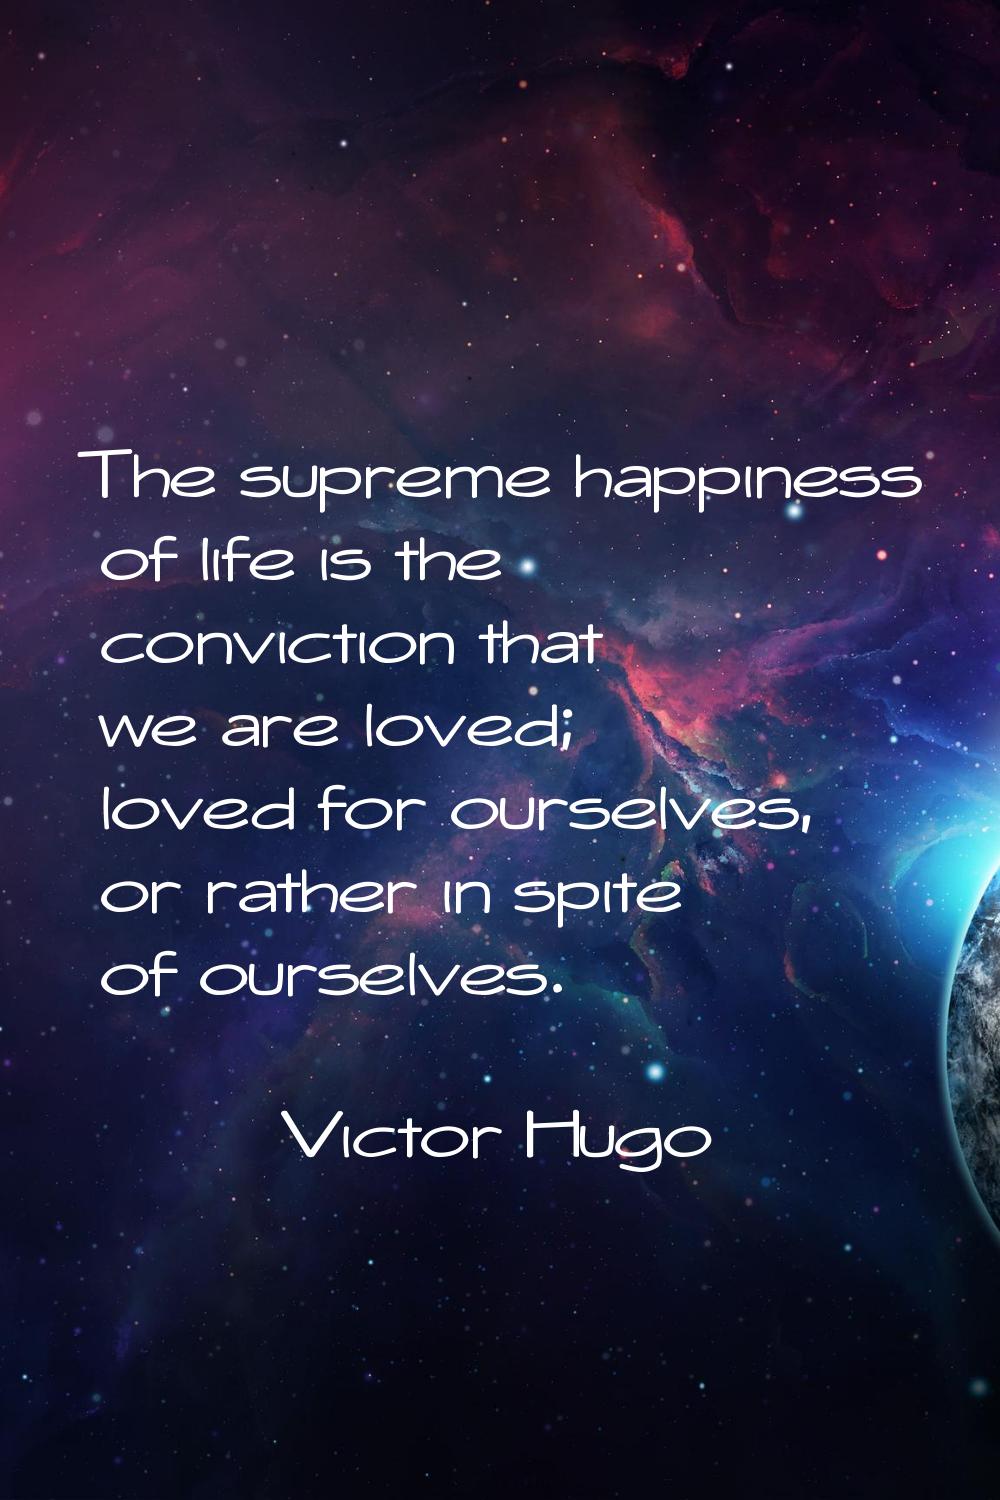 The supreme happiness of life is the conviction that we are loved; loved for ourselves, or rather i